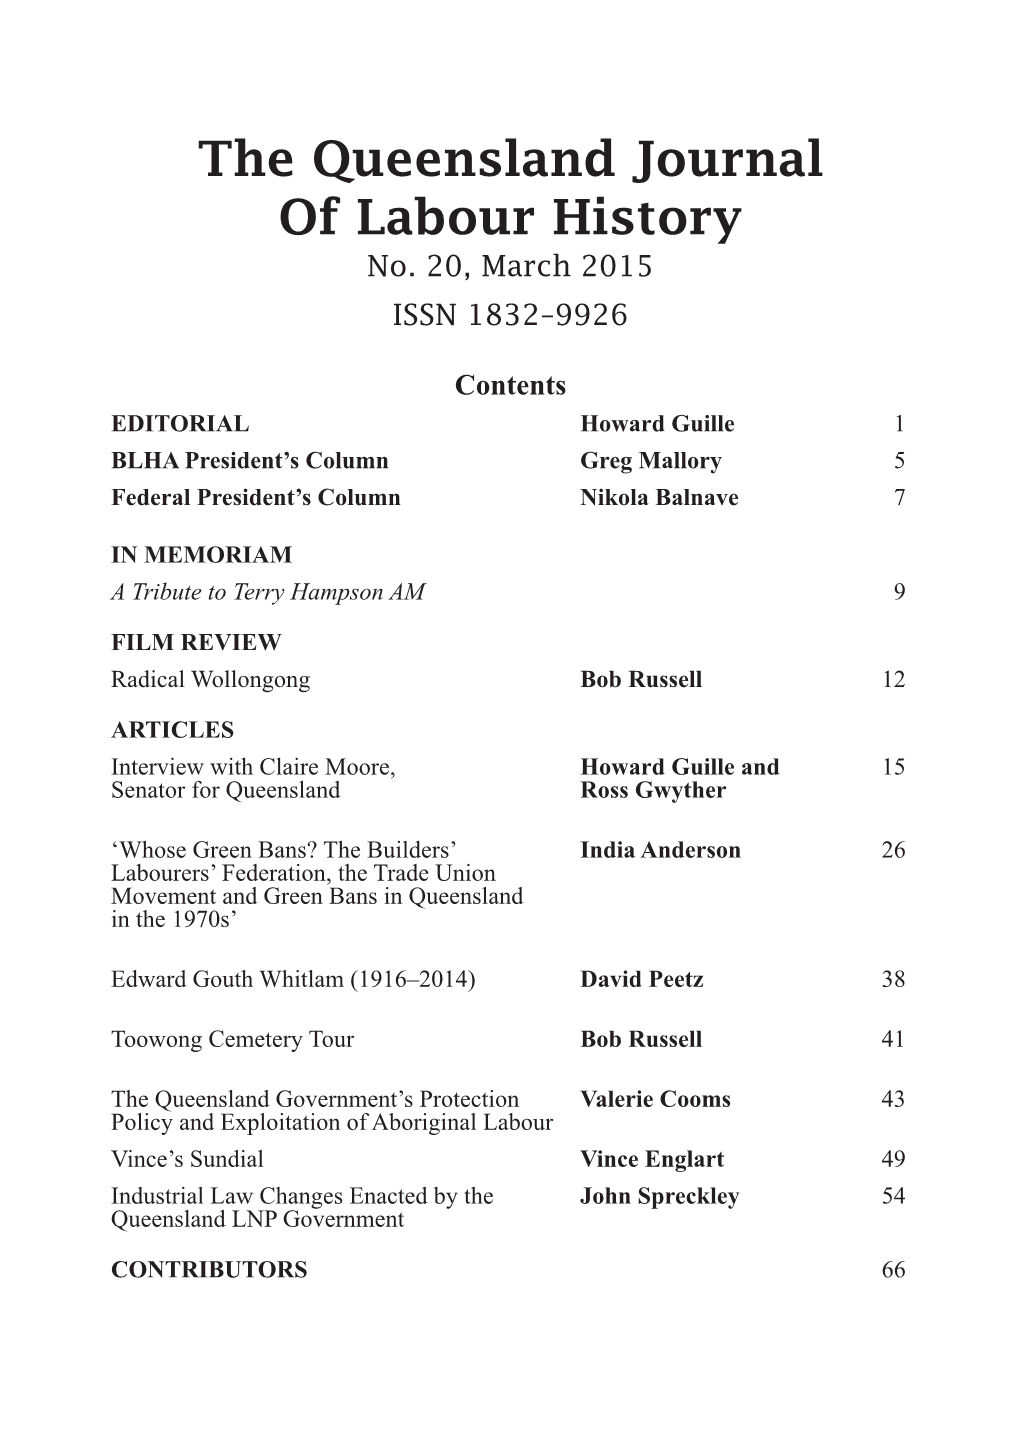 The Queensland Journal of Labour History No